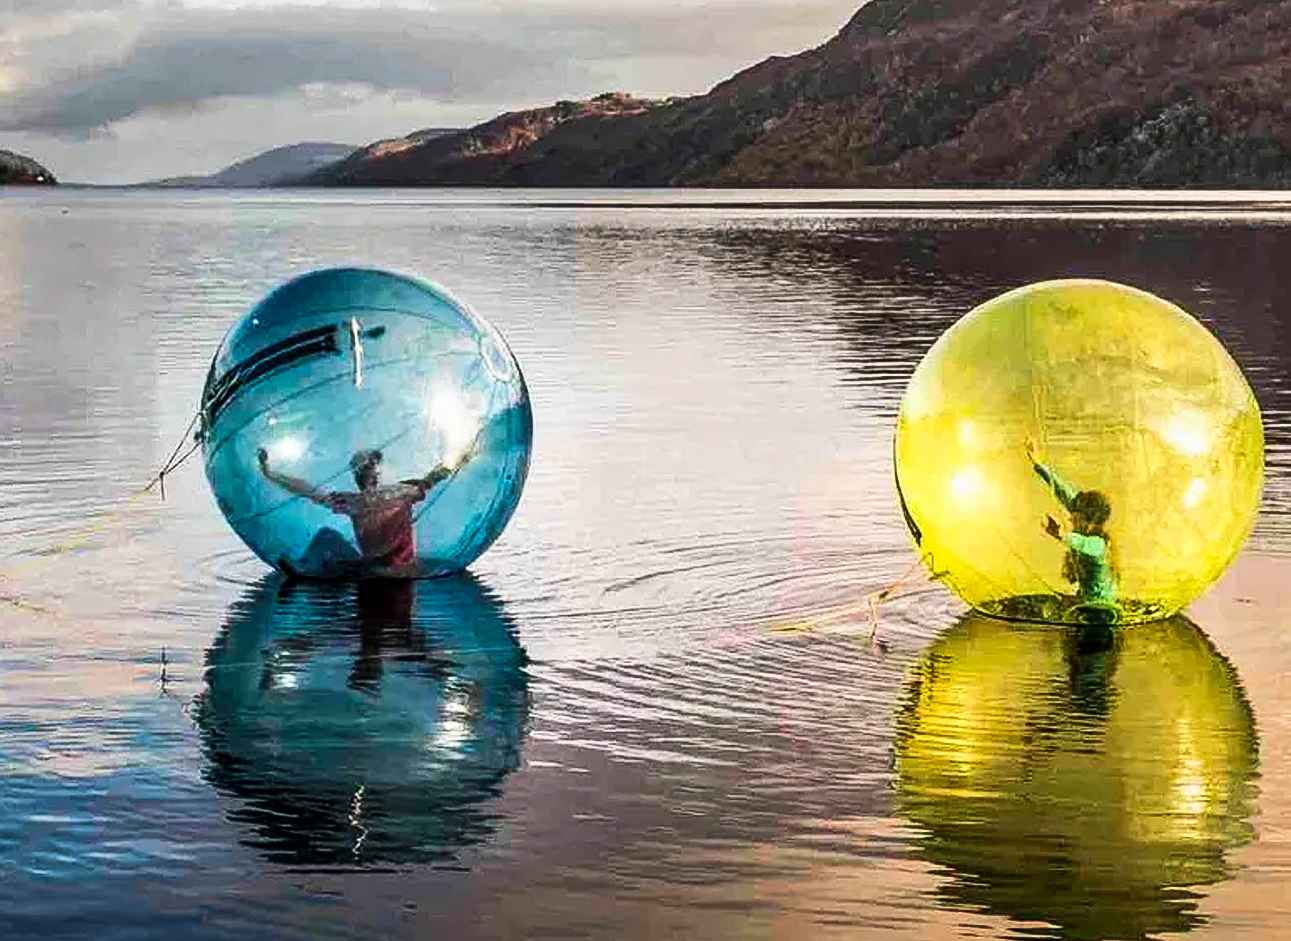 Zorbing - Enjoy the excitement of zorbing and rolling down hills in an inflatable ball